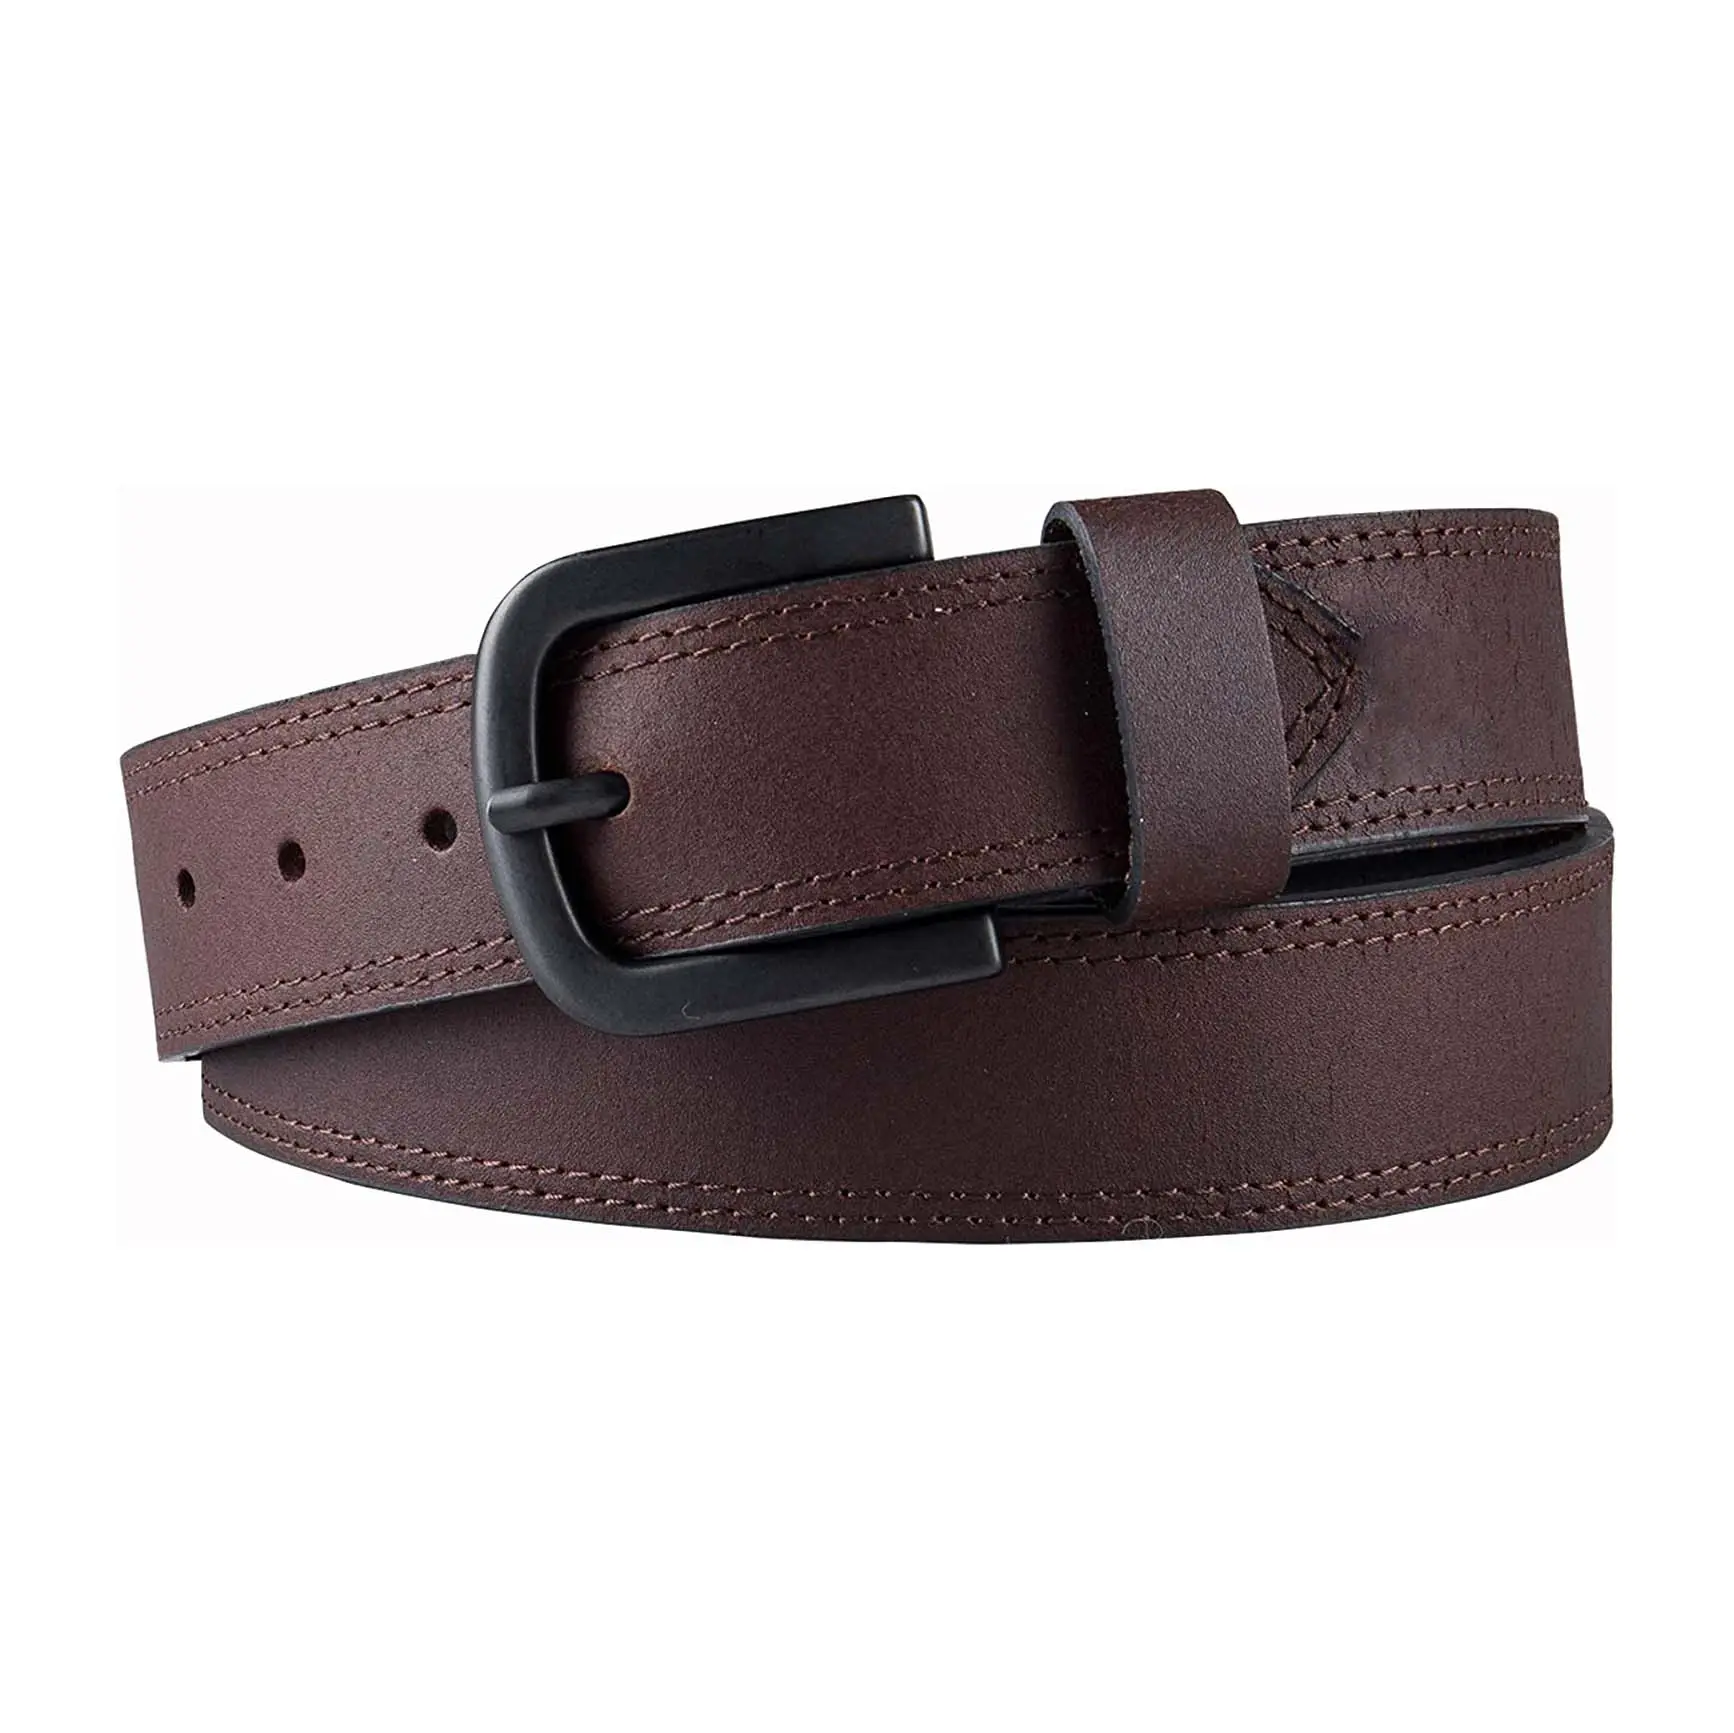 High quality Reasonable price Create your idea Design your own style Best material for leather belt